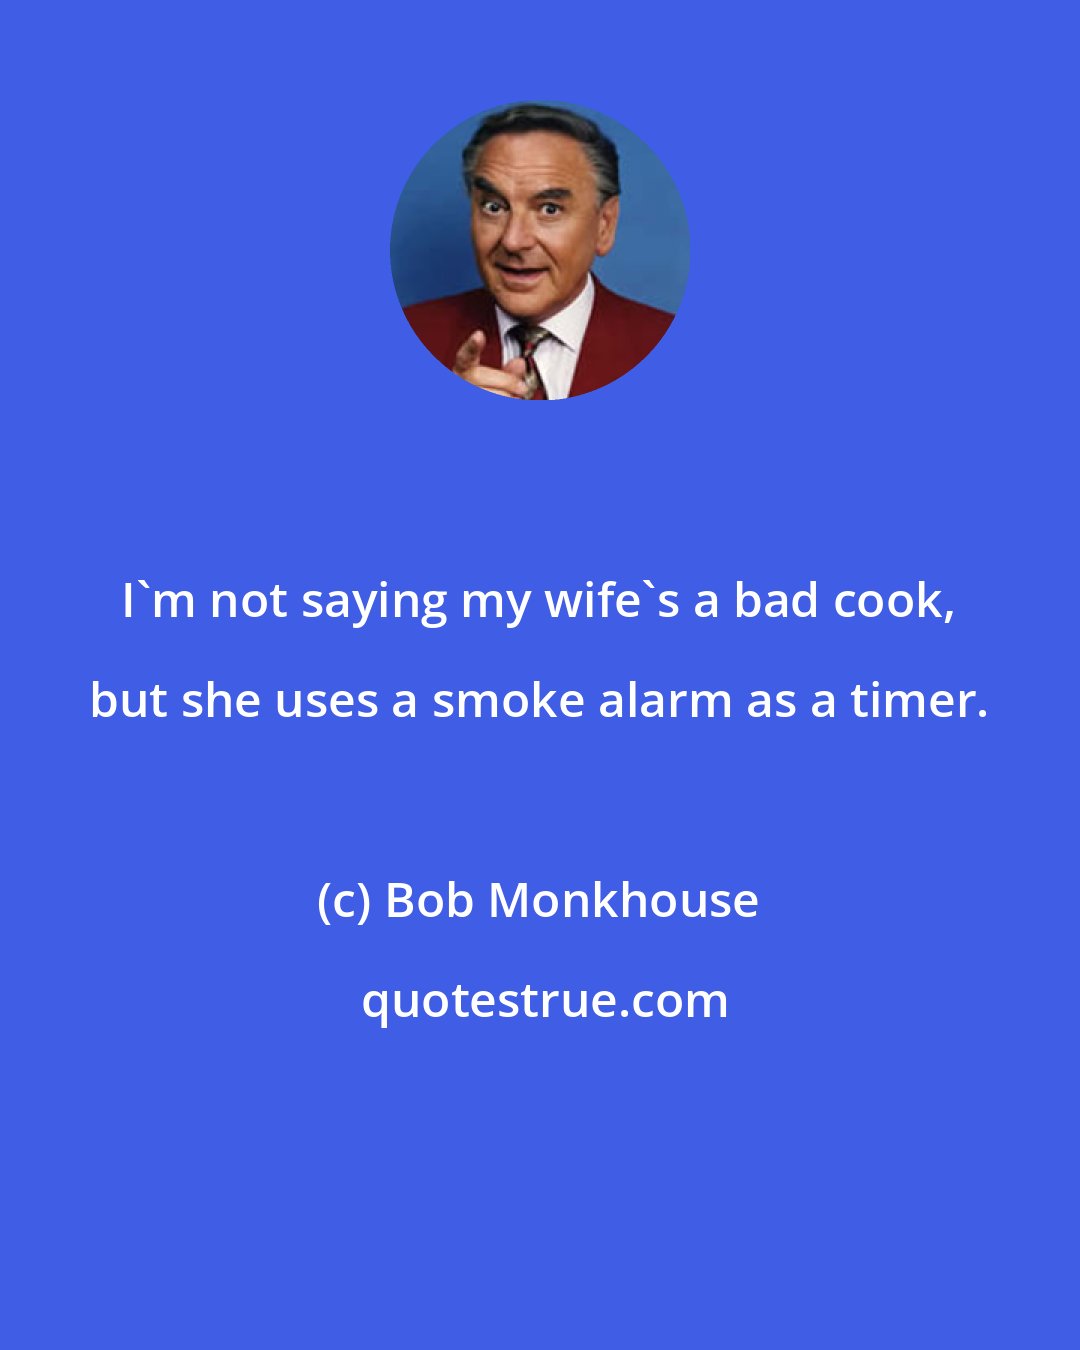 Bob Monkhouse: I'm not saying my wife's a bad cook, but she uses a smoke alarm as a timer.